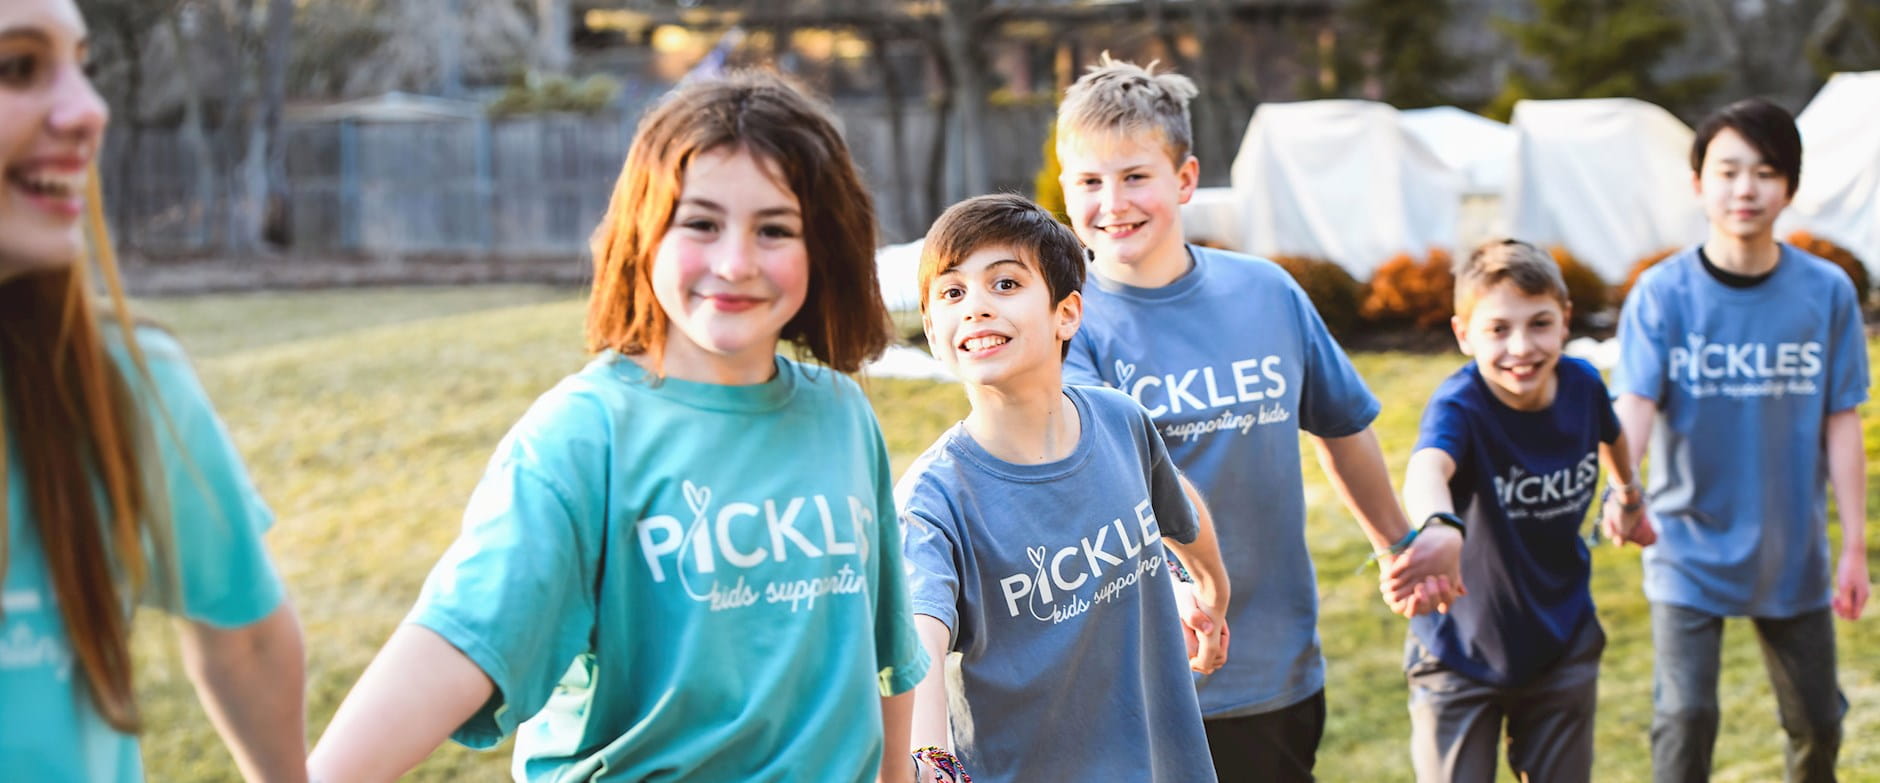 Kids a part of the Pickles Group organization join hands and smile outside